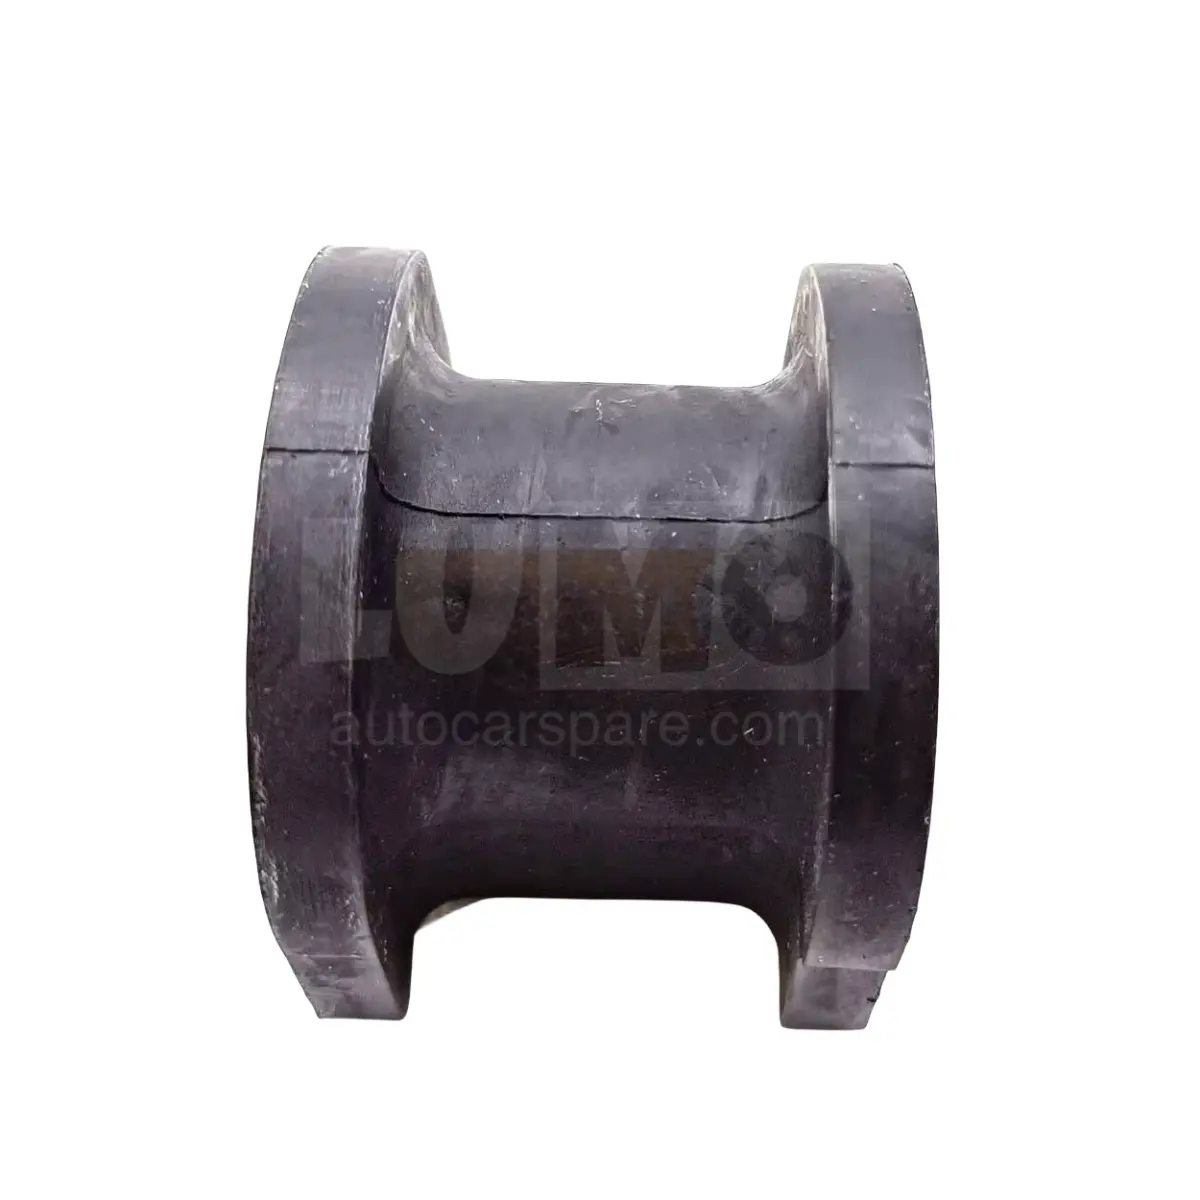 LUMO Other Car Parts Supplier Suspension Rubber Bushing Rear Stabilizer Bushing For Mitsubishi PAJERO V97 V98 4156A041